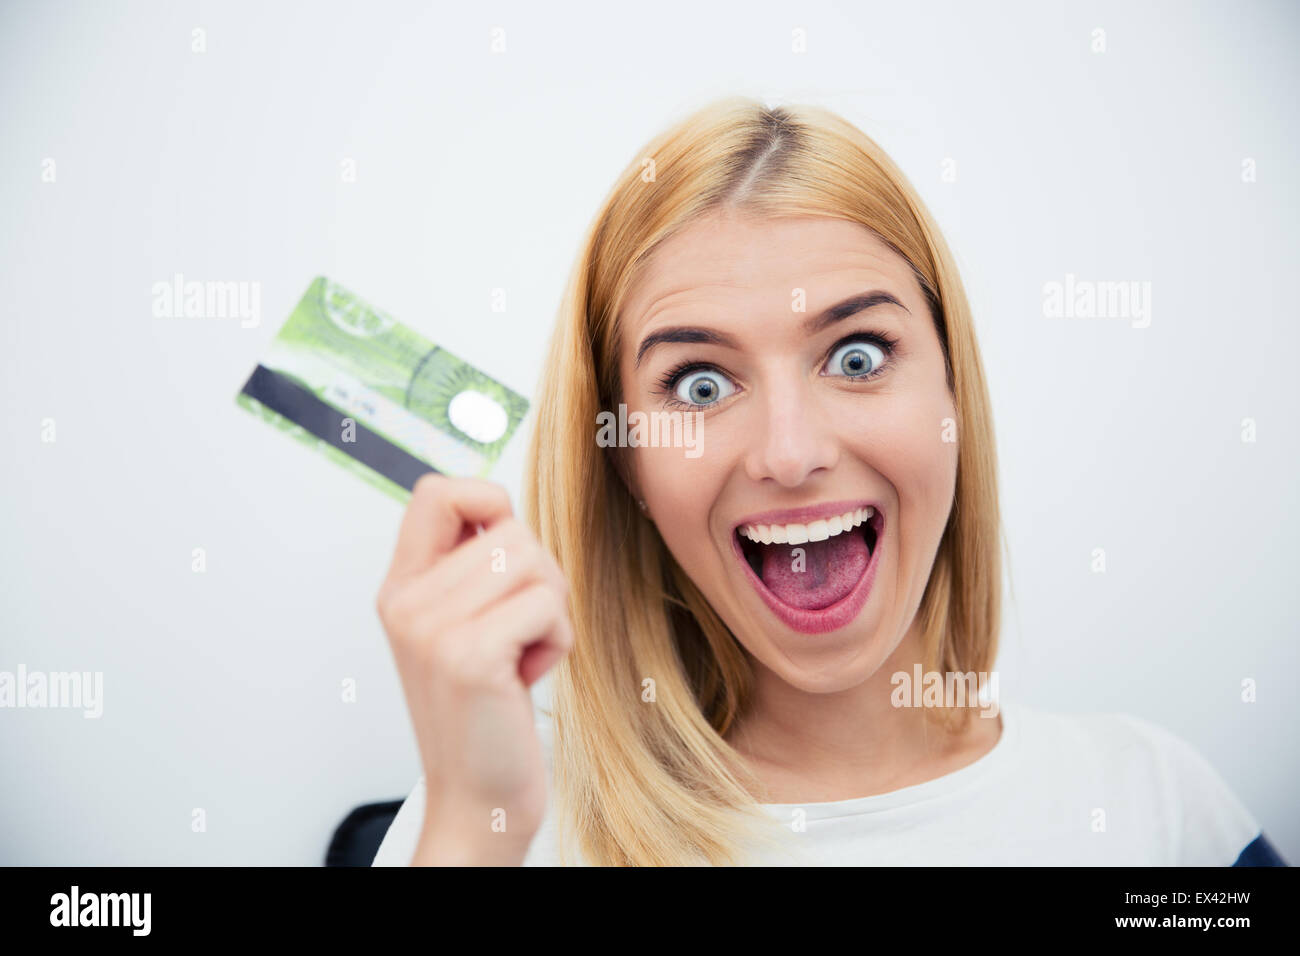 Cheerful young woman holding bank card over gray background Stock Photo